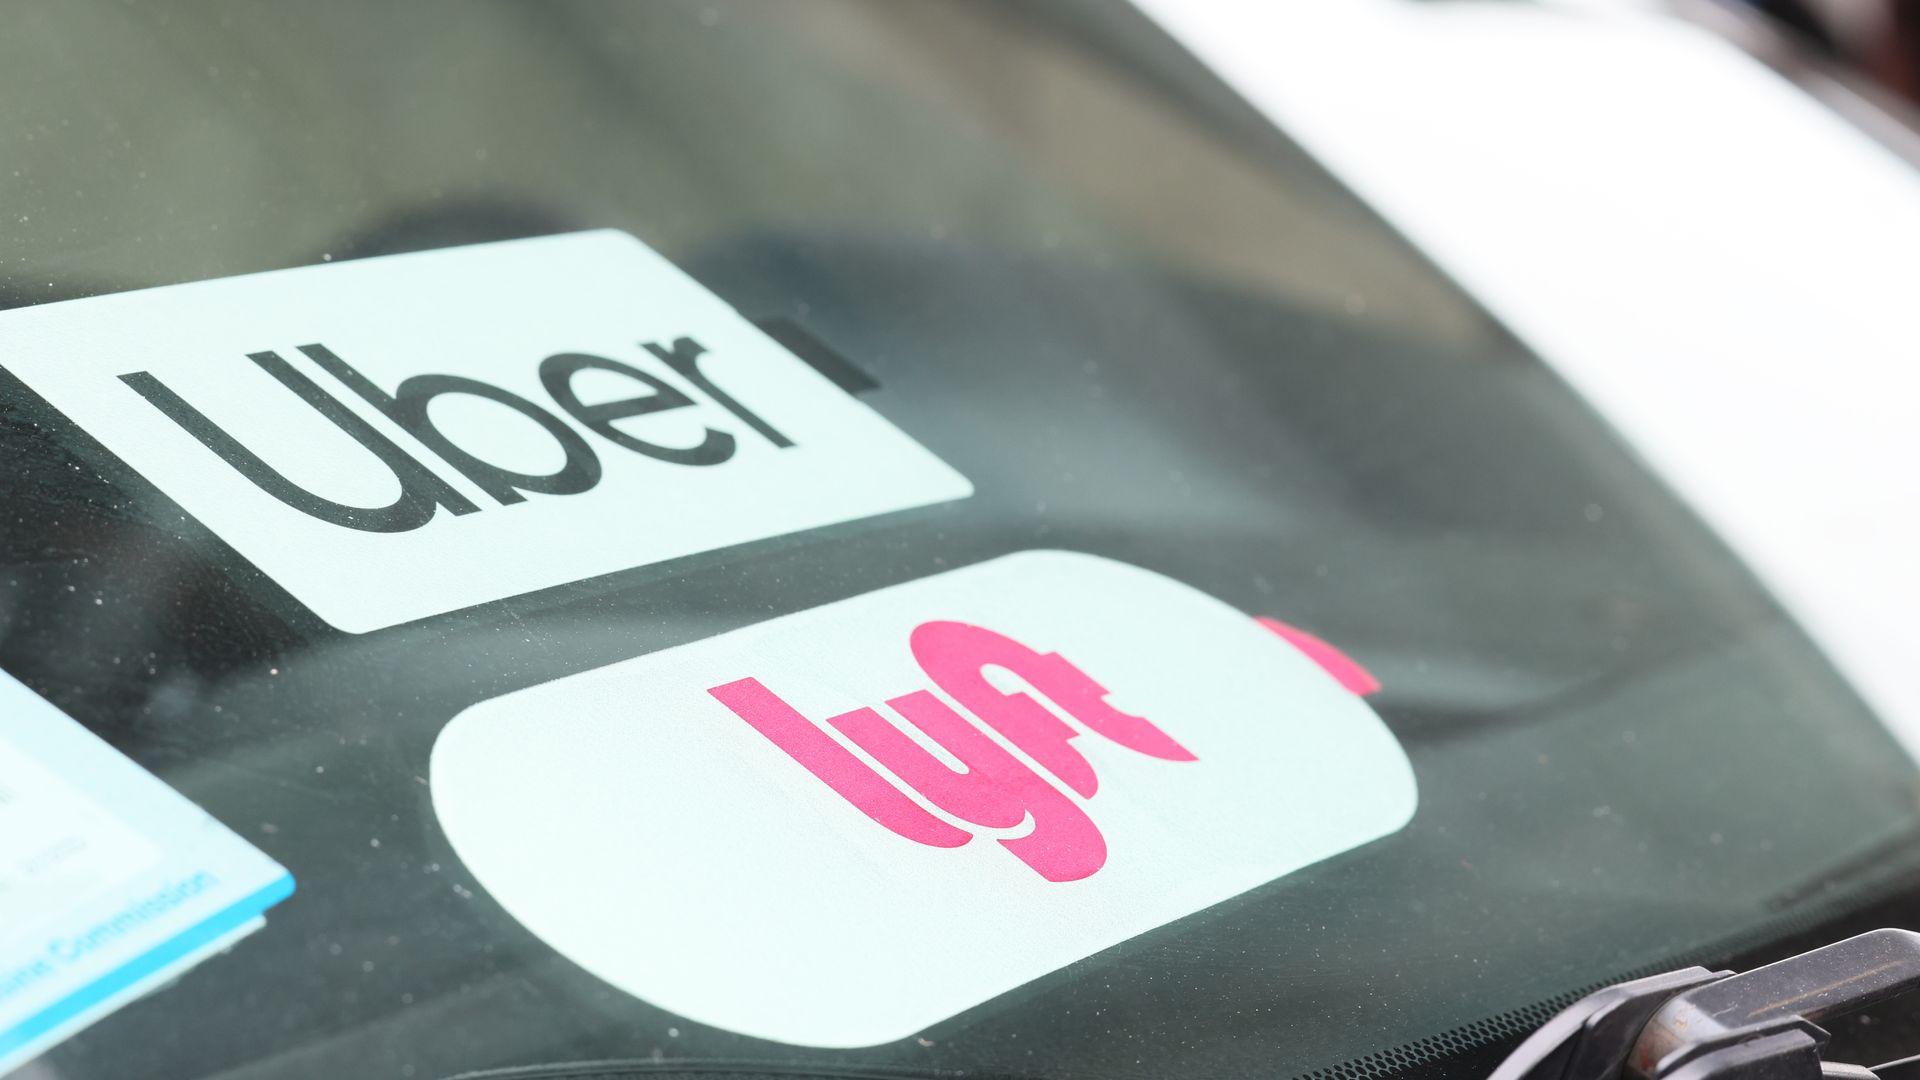 Uber and Lyft have agreed to pay a combined 8 million to settle allegations that the companies illegally withheld wages from drivers.